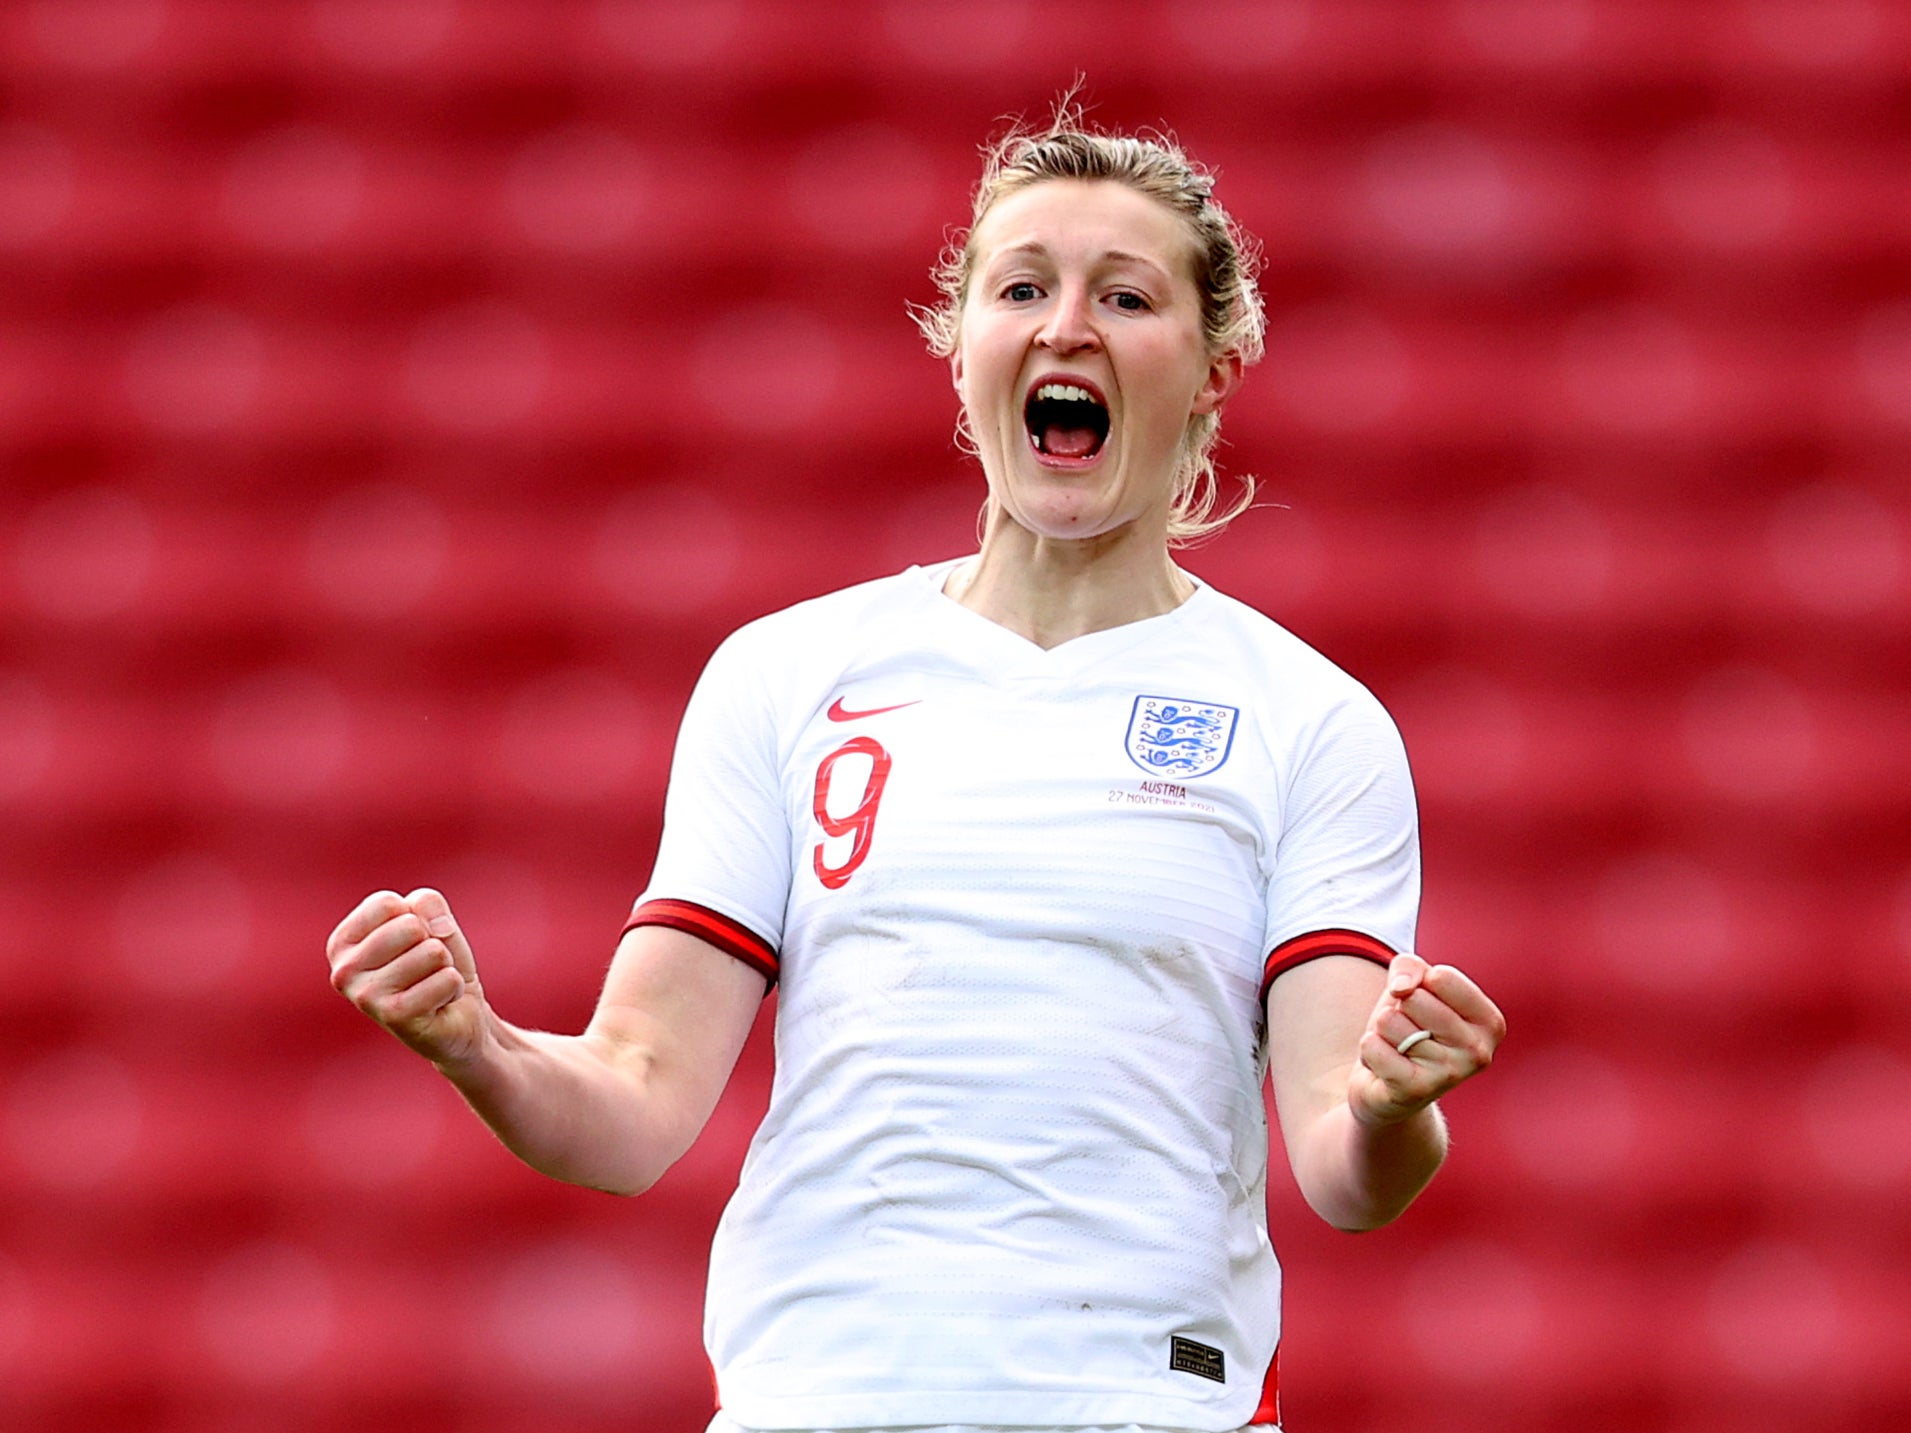 The Lionesses forward scored against Austria on her 100th appearance for her country